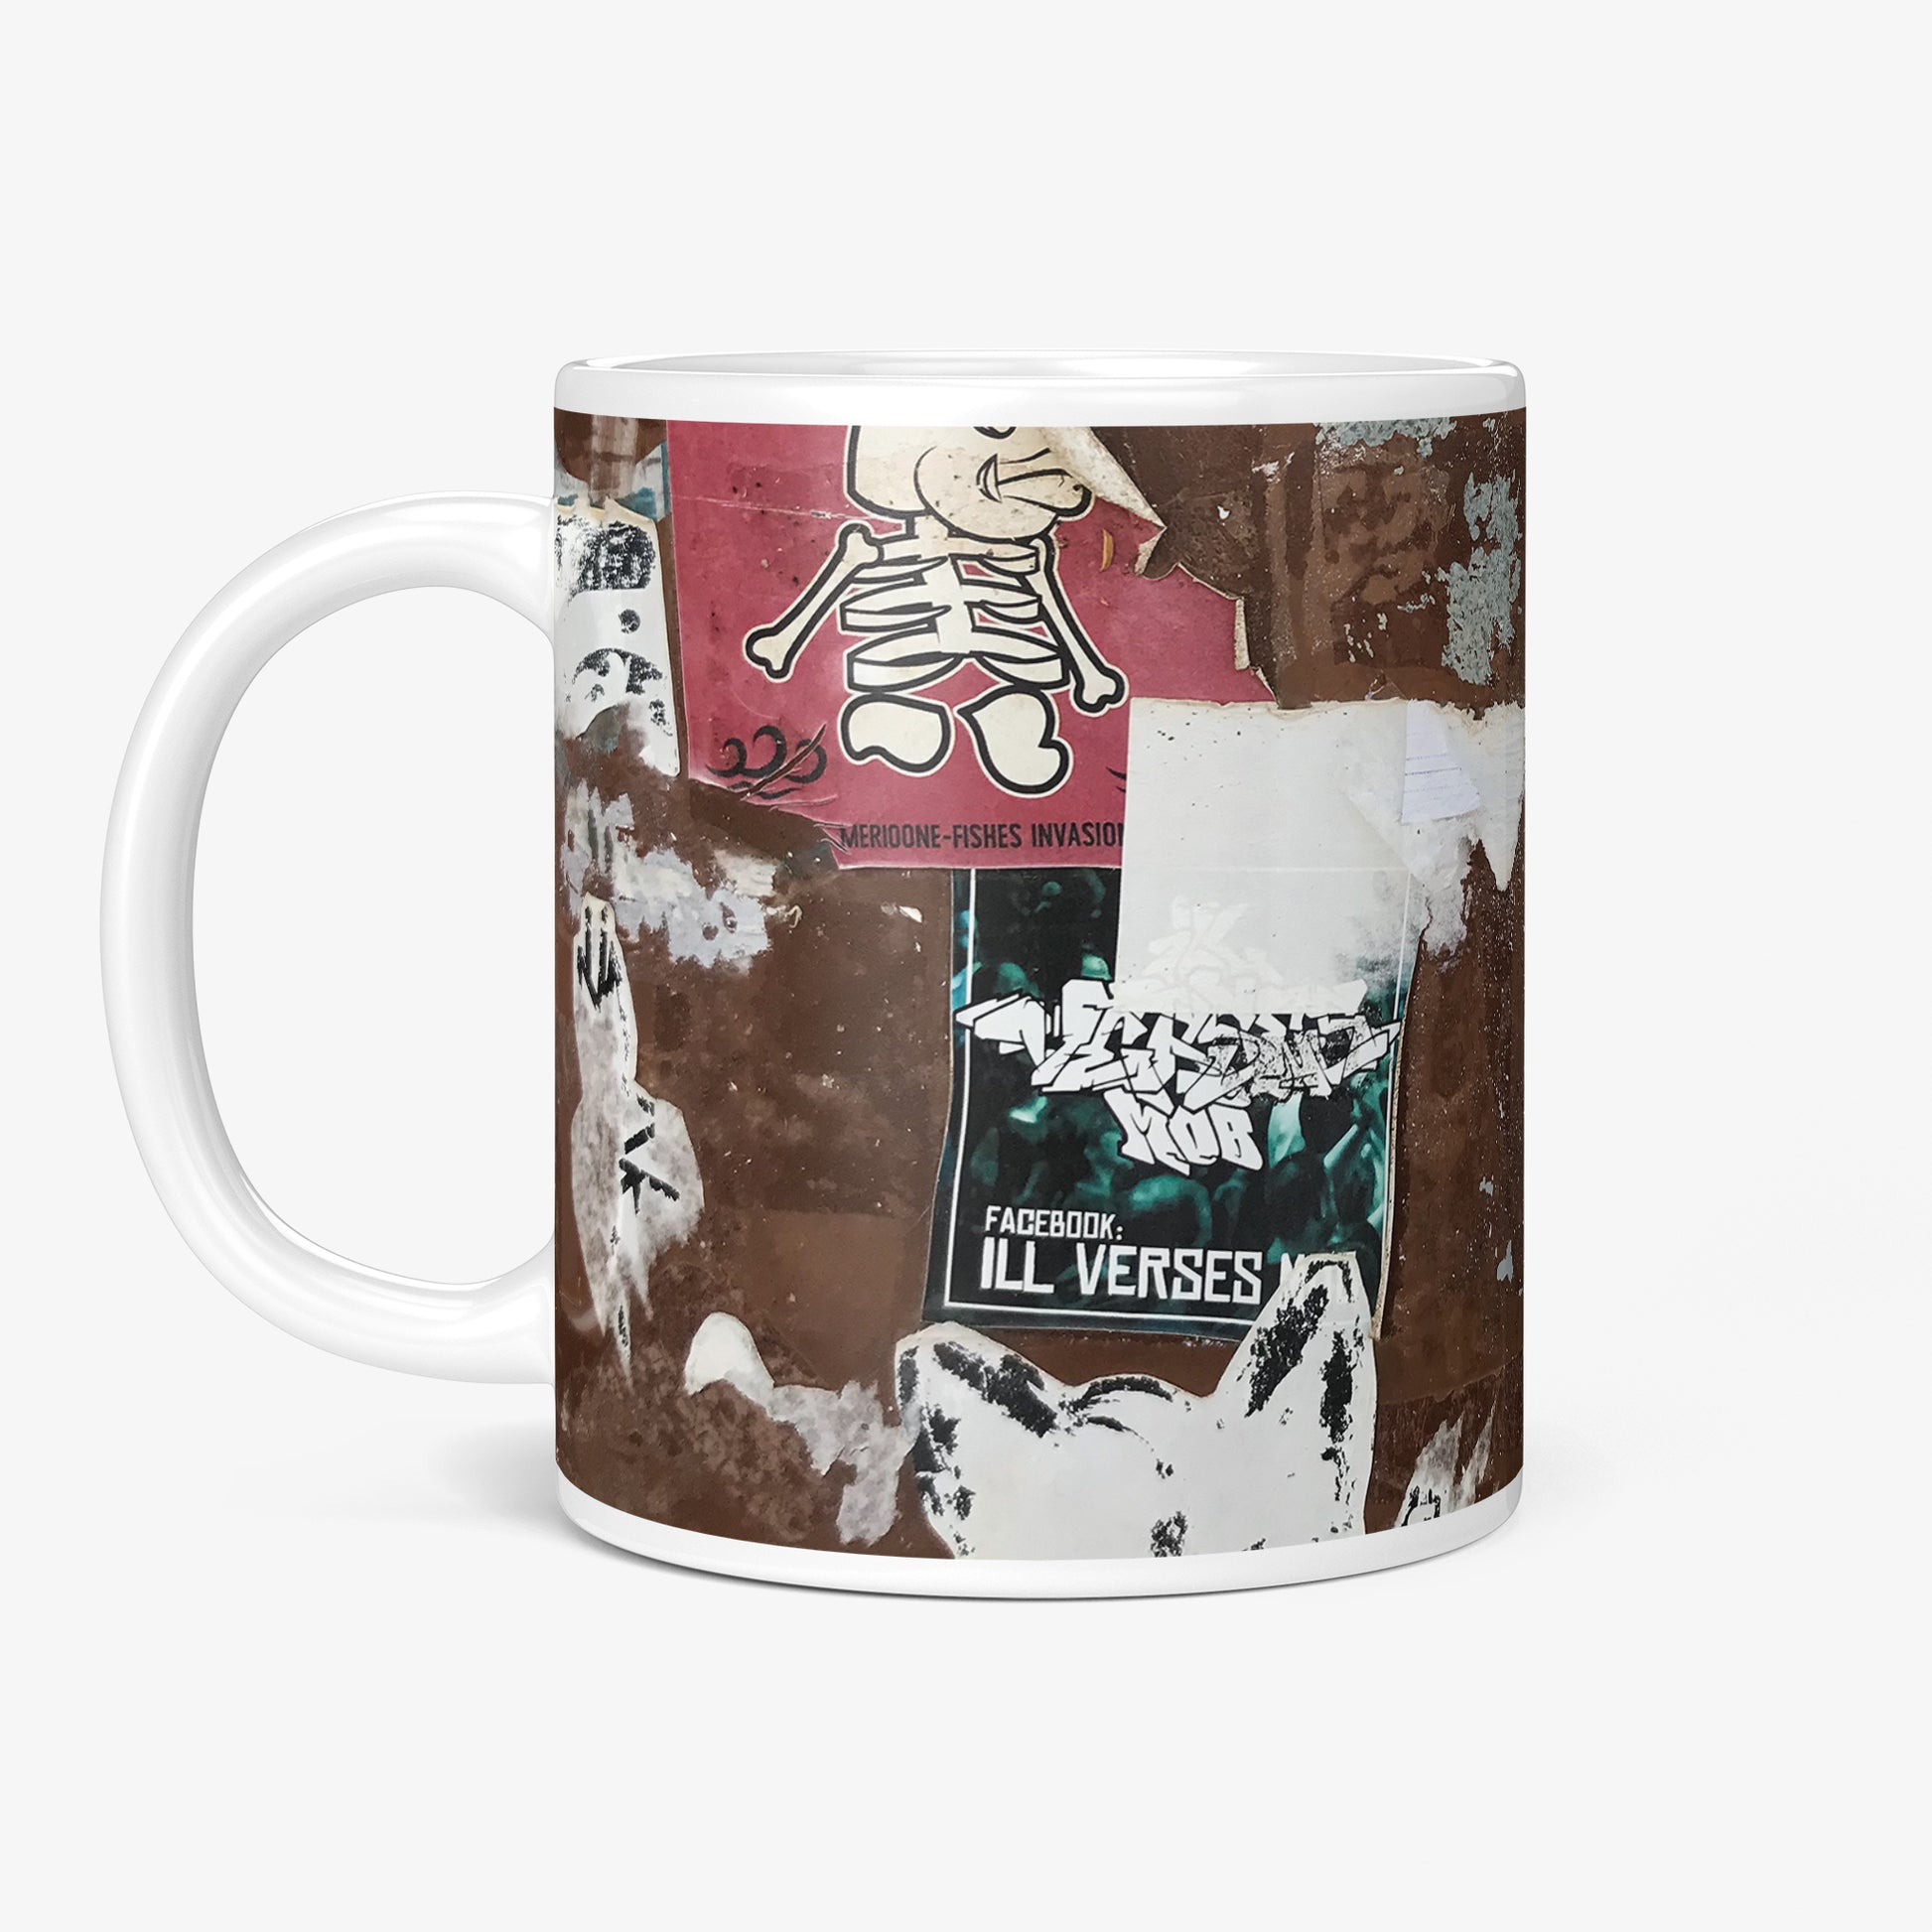 Be inspired by our Urban Art Coffee Mug – Merioone Fishes from Lagos. The mug has a capacity of 11 oz and the handle on the left side. The design of the mug captures the essence of the street and gives the mug an authentic urban feel, making it resemble a piece of street art itself.